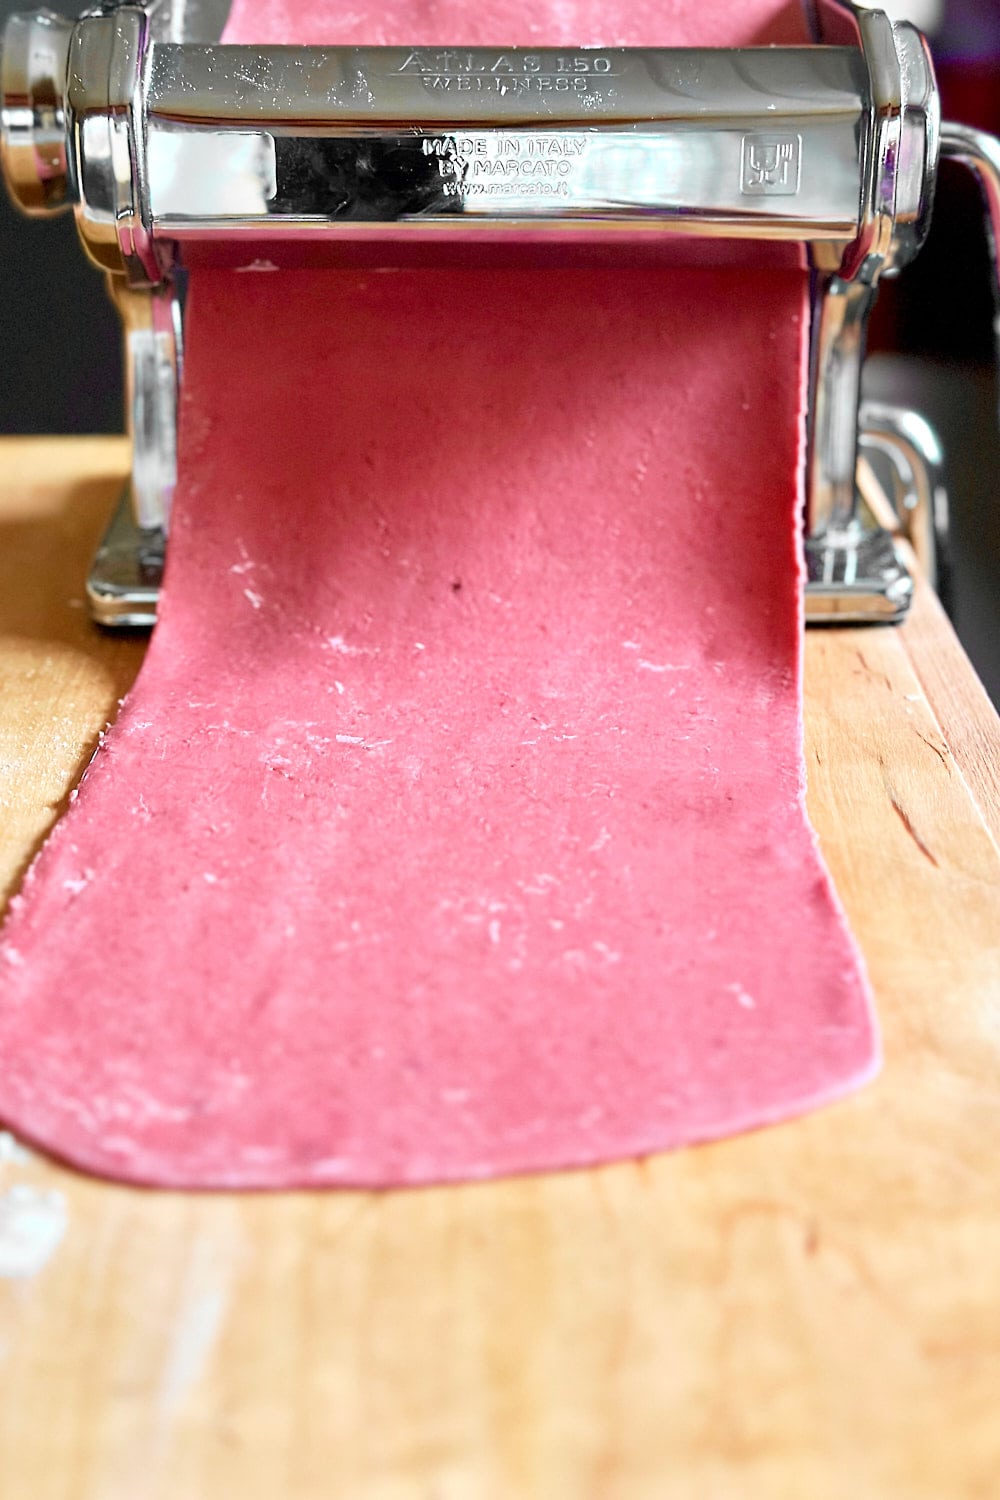 Using a pasta machine to roll the beet pasta dough out into thin pasta sheets.